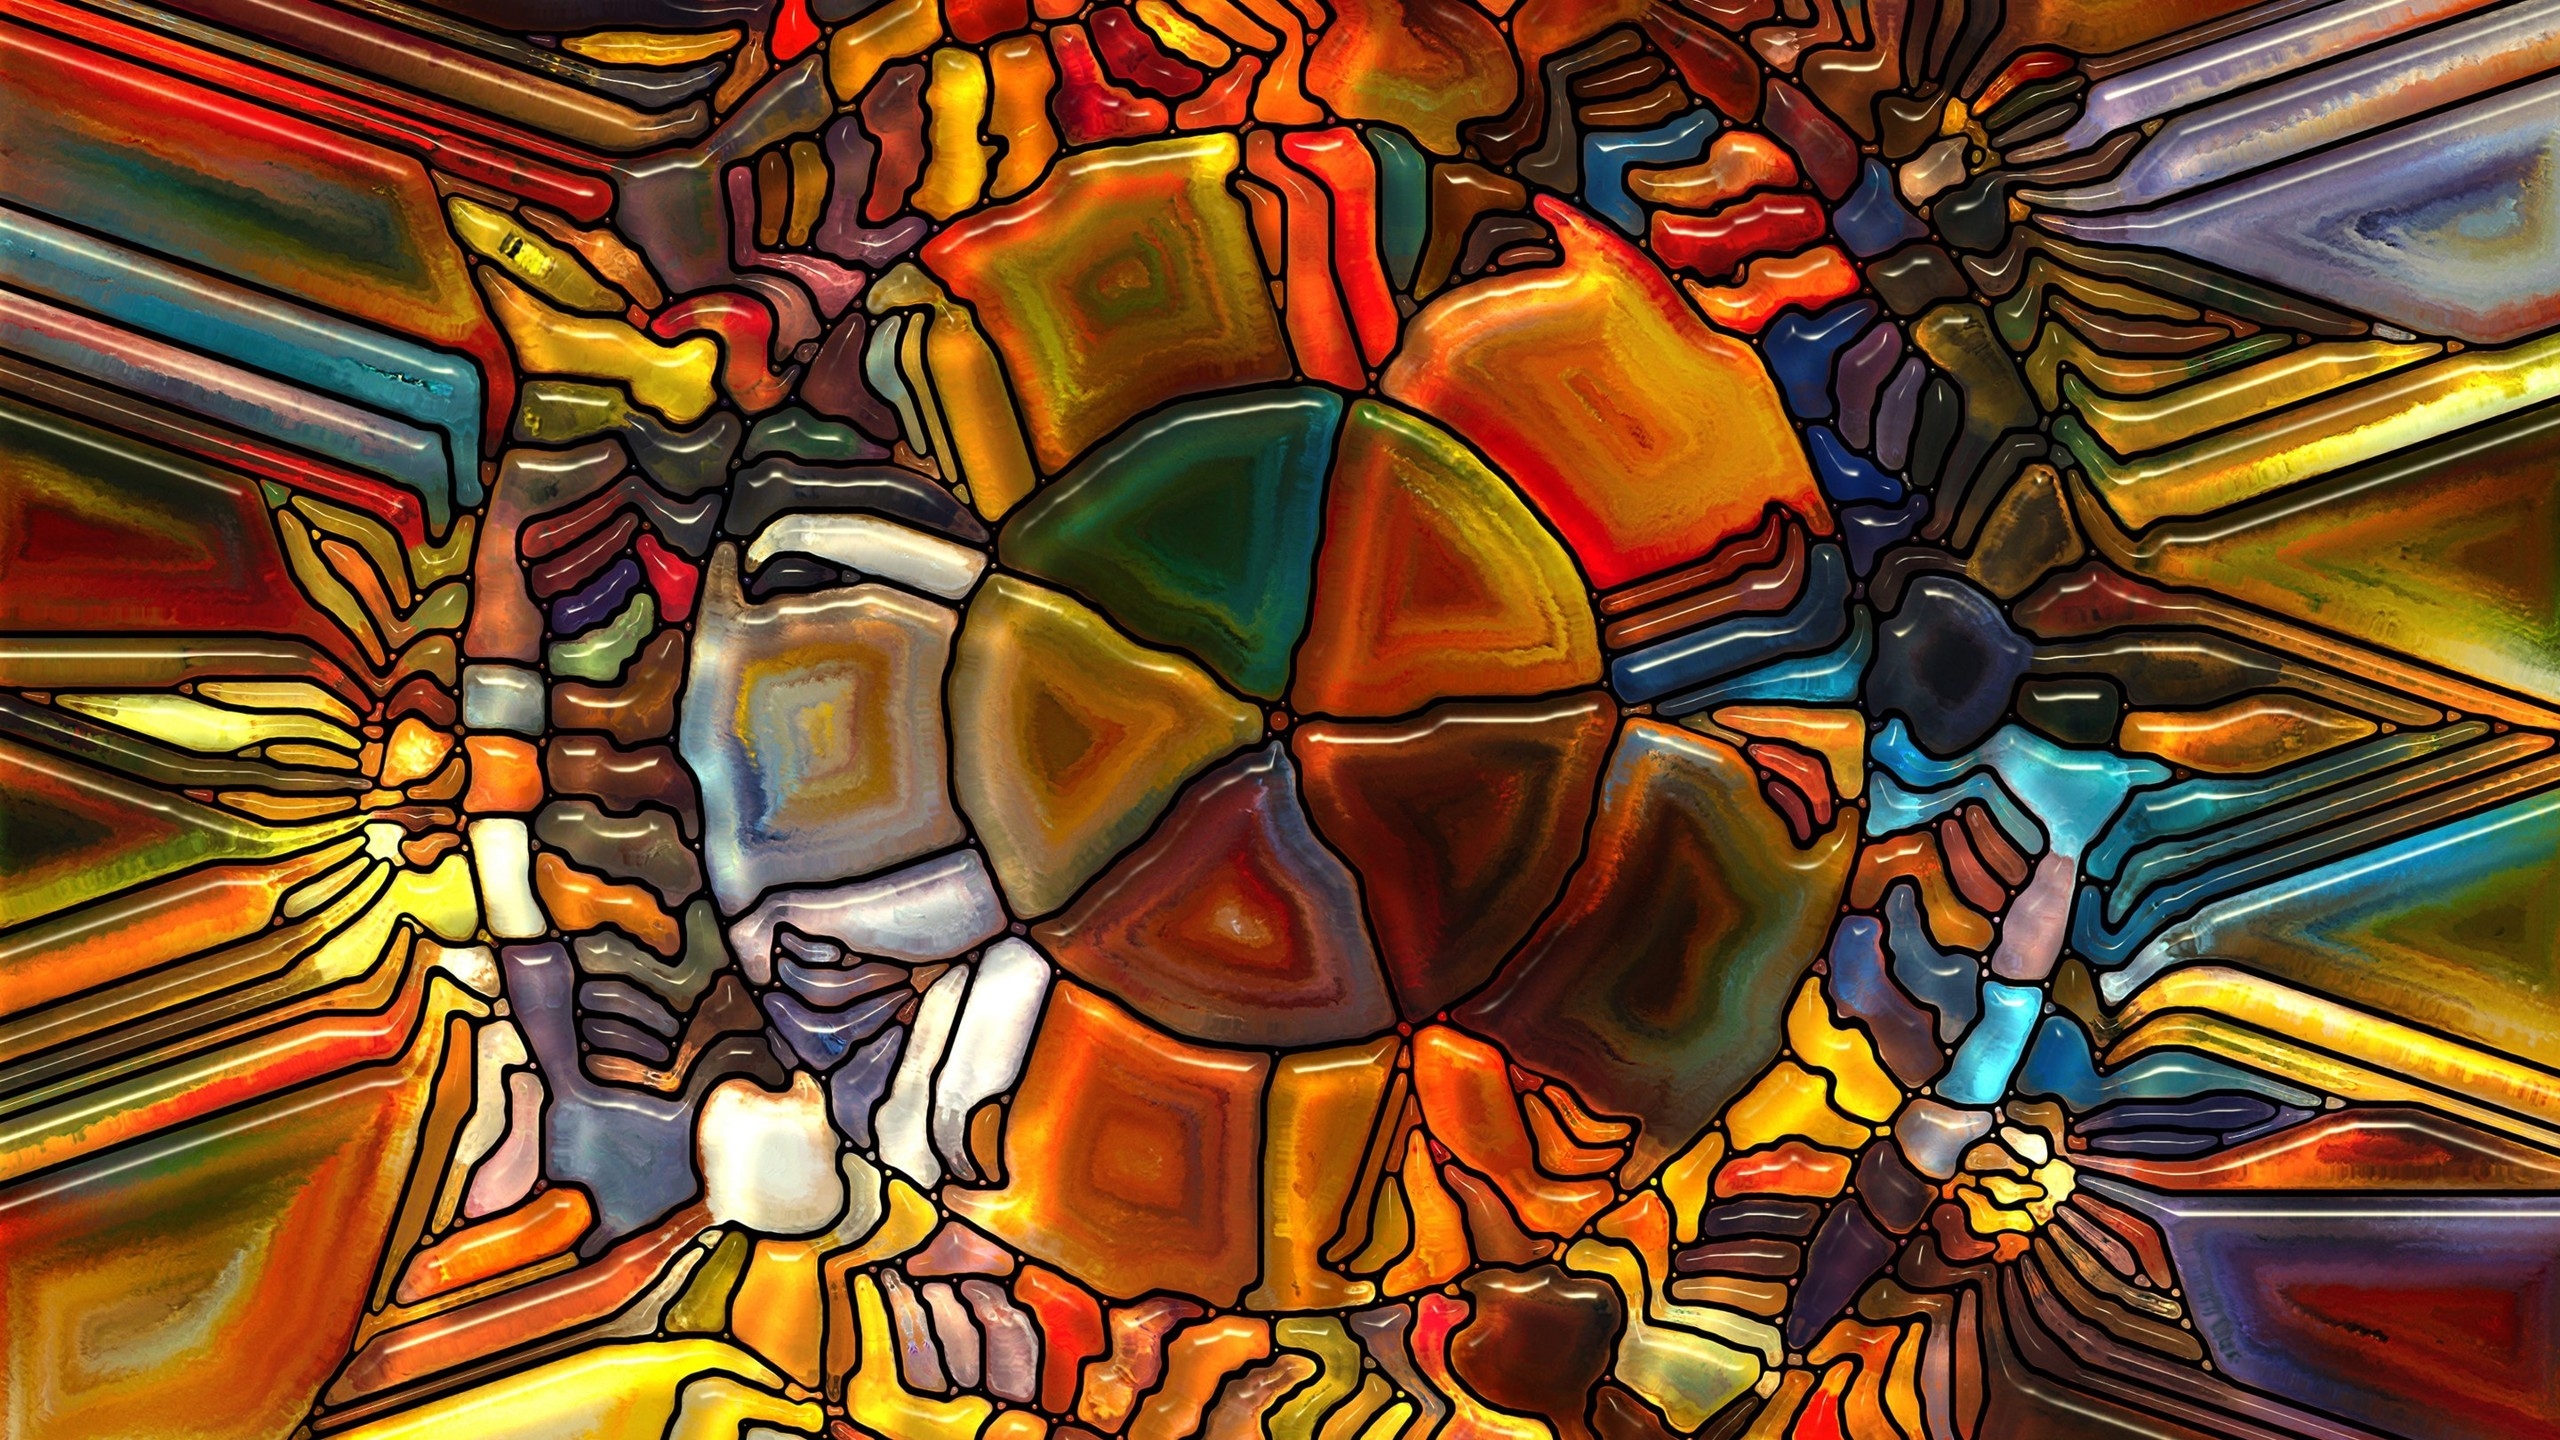 Stained Glass for 2560x1440 HDTV resolution